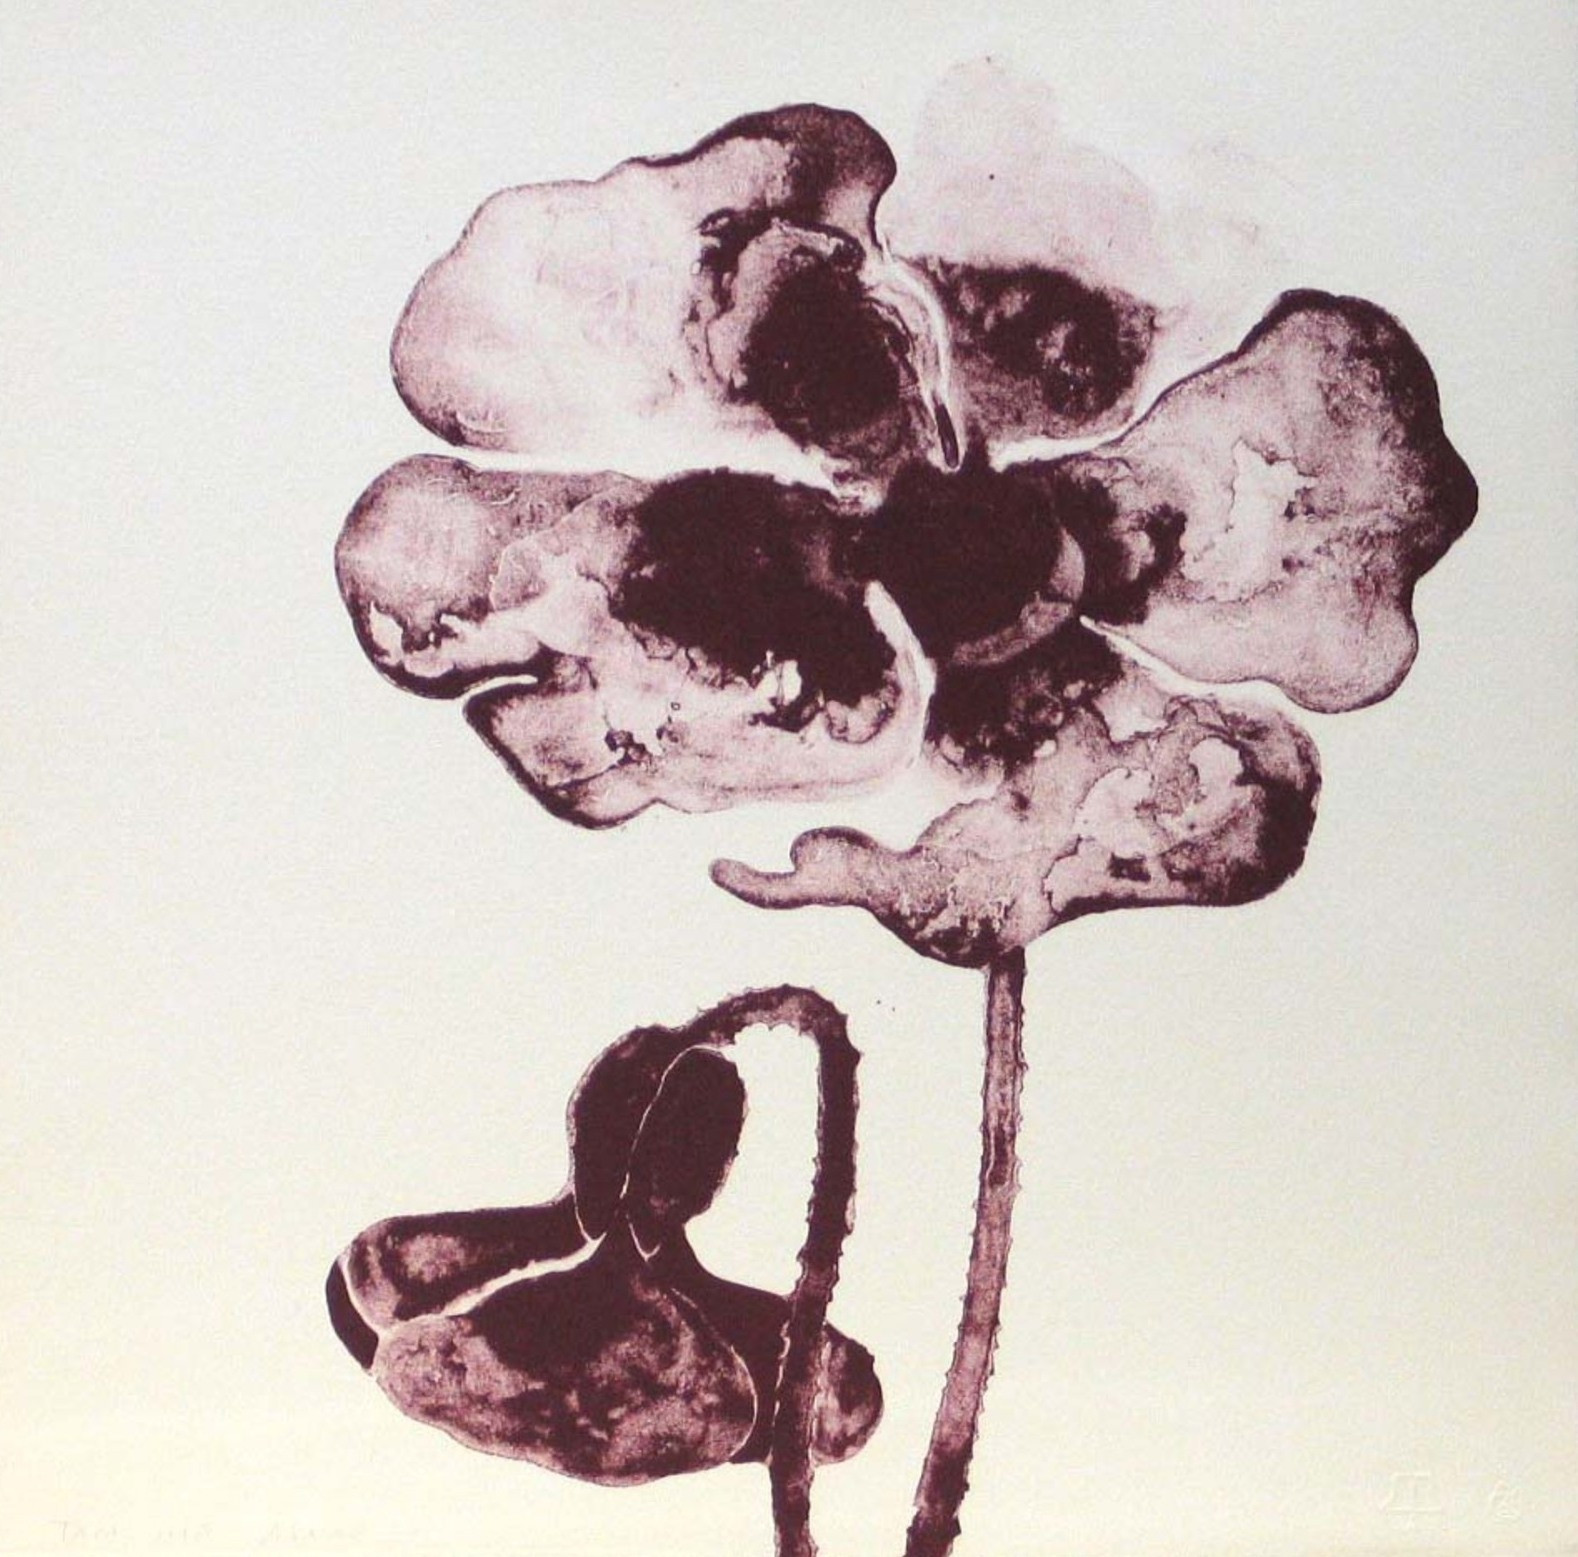 Ruth Asawa. Untitled from Flowers. 1965. One from a portfolio of twelve lithographs (including title page and colophon). Tamarind Lithography Workshop, Inc., Los Angeles. proof outside the edition of 20. Gift of Kleiner, Bell & Co. © Estate of Ruth Asawa.